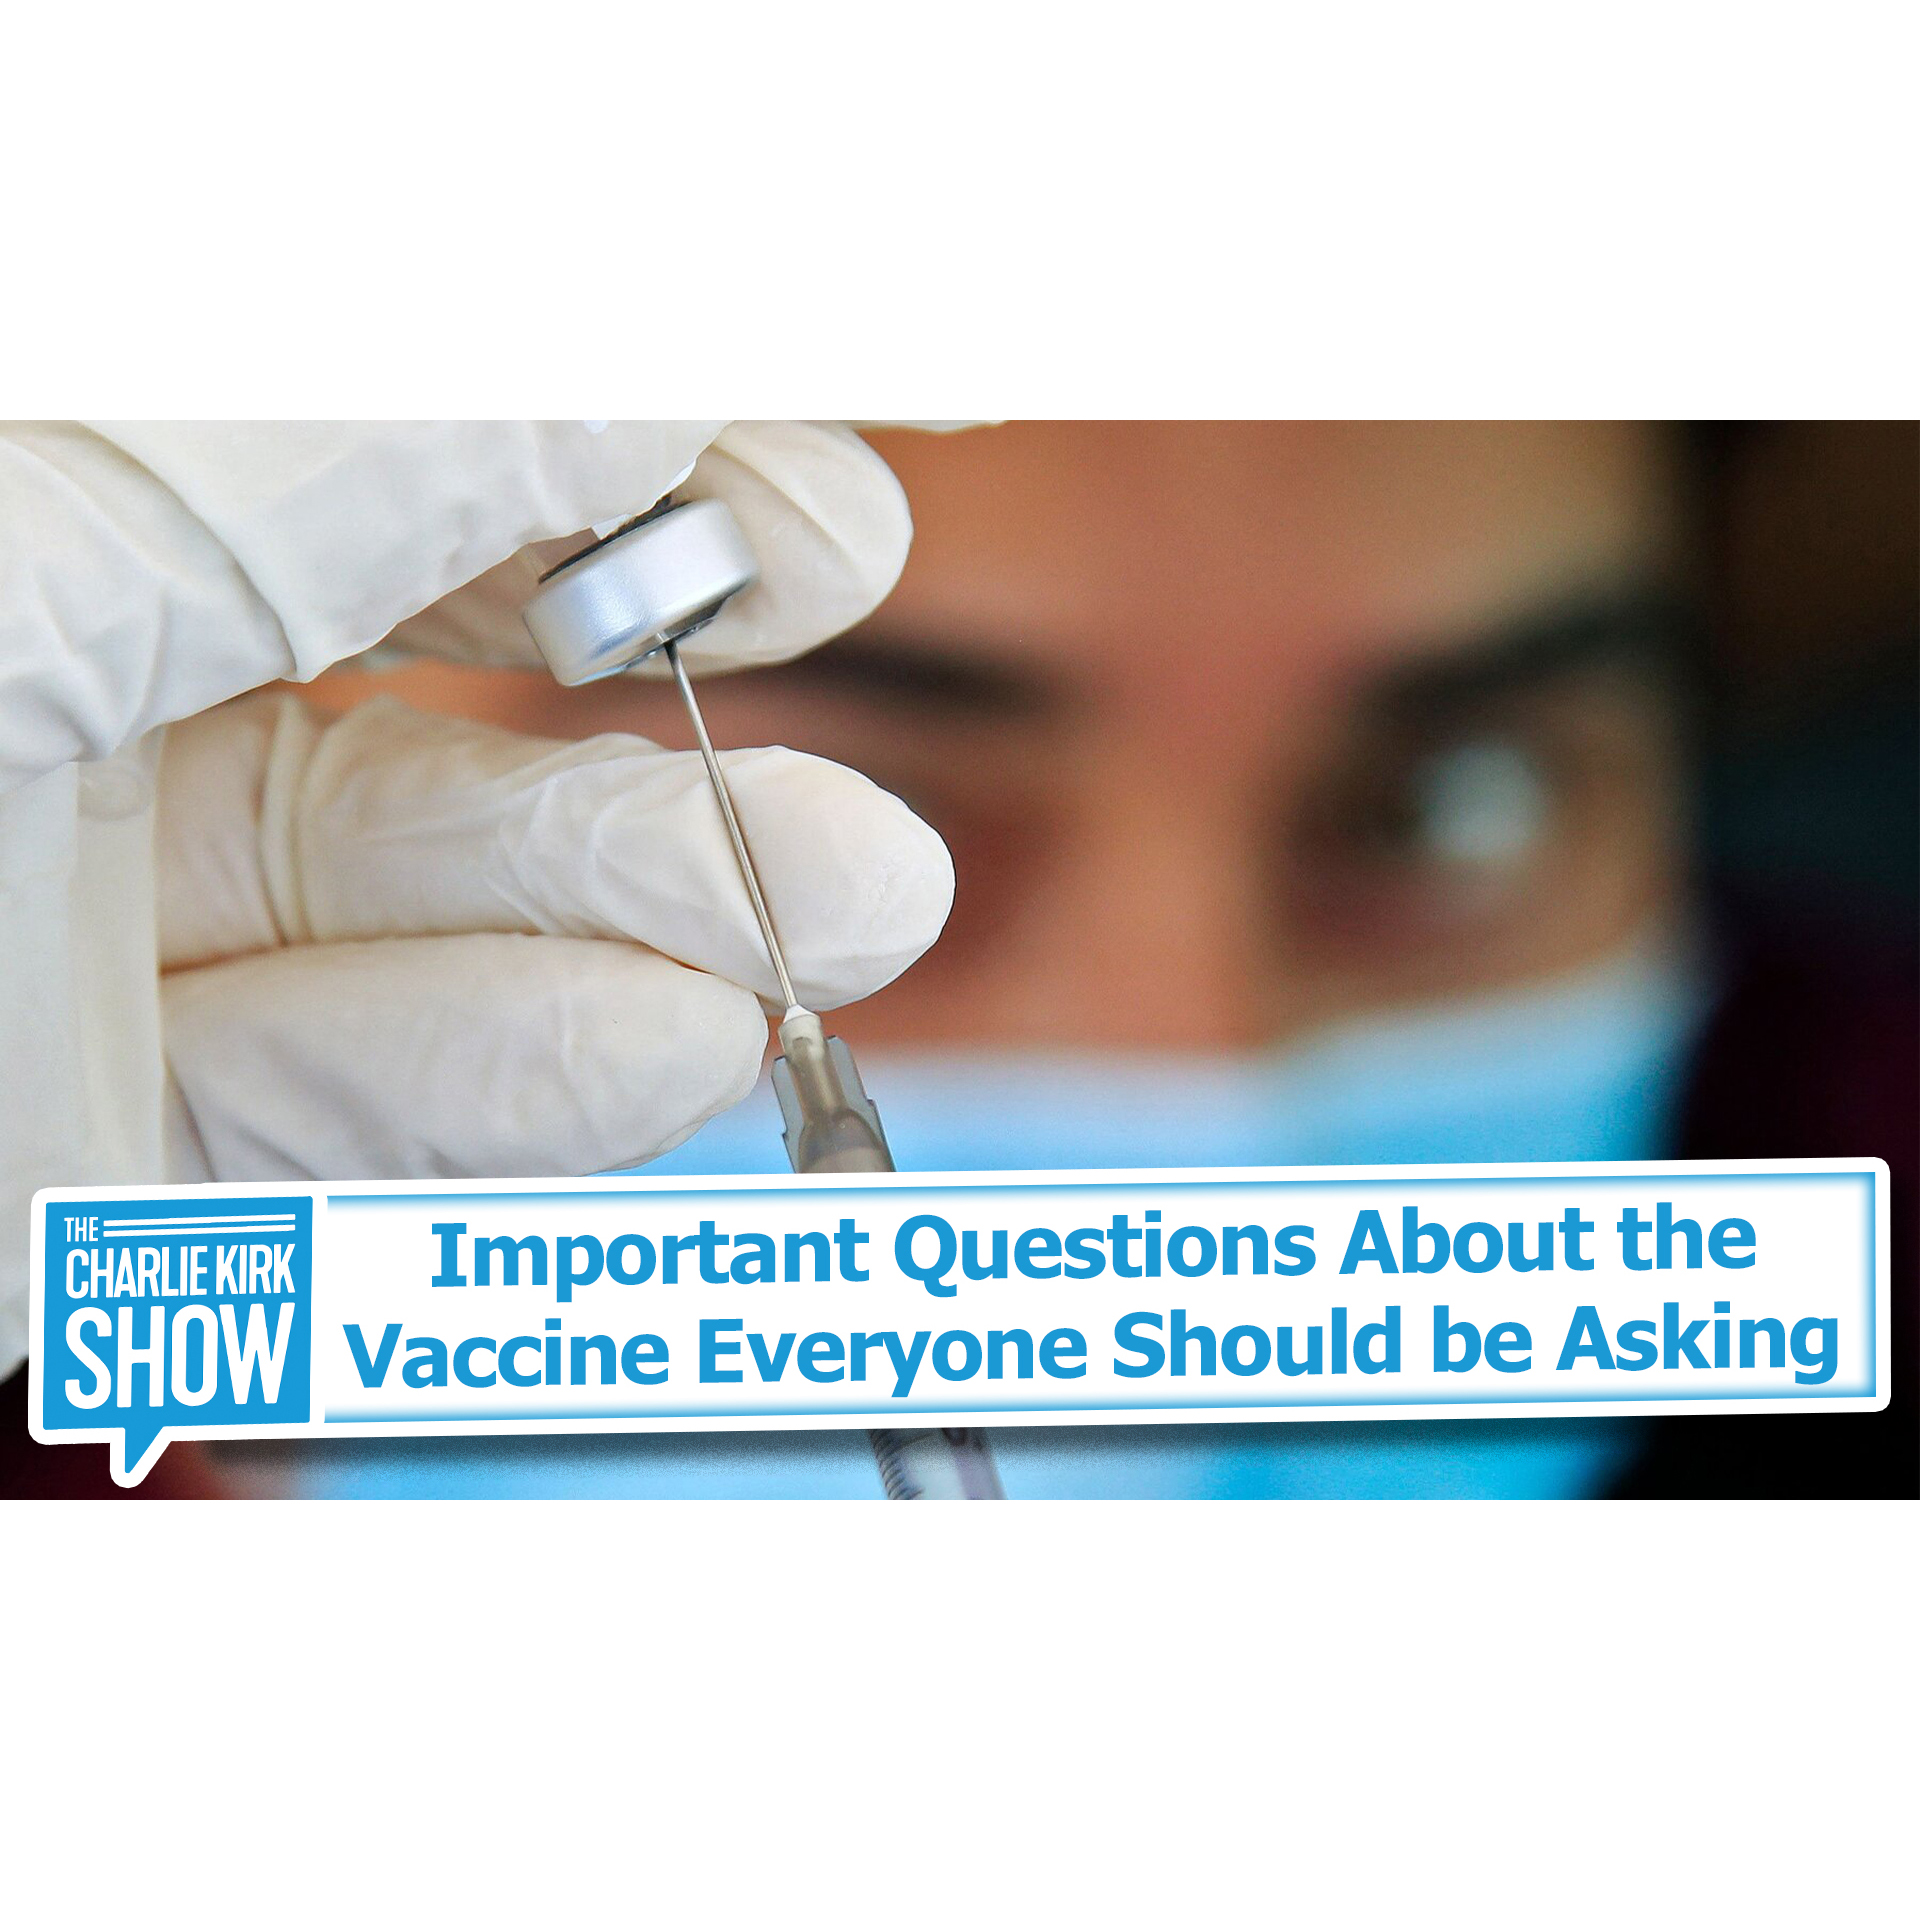 Important Questions About the Vaccine Everyone Should be Asking